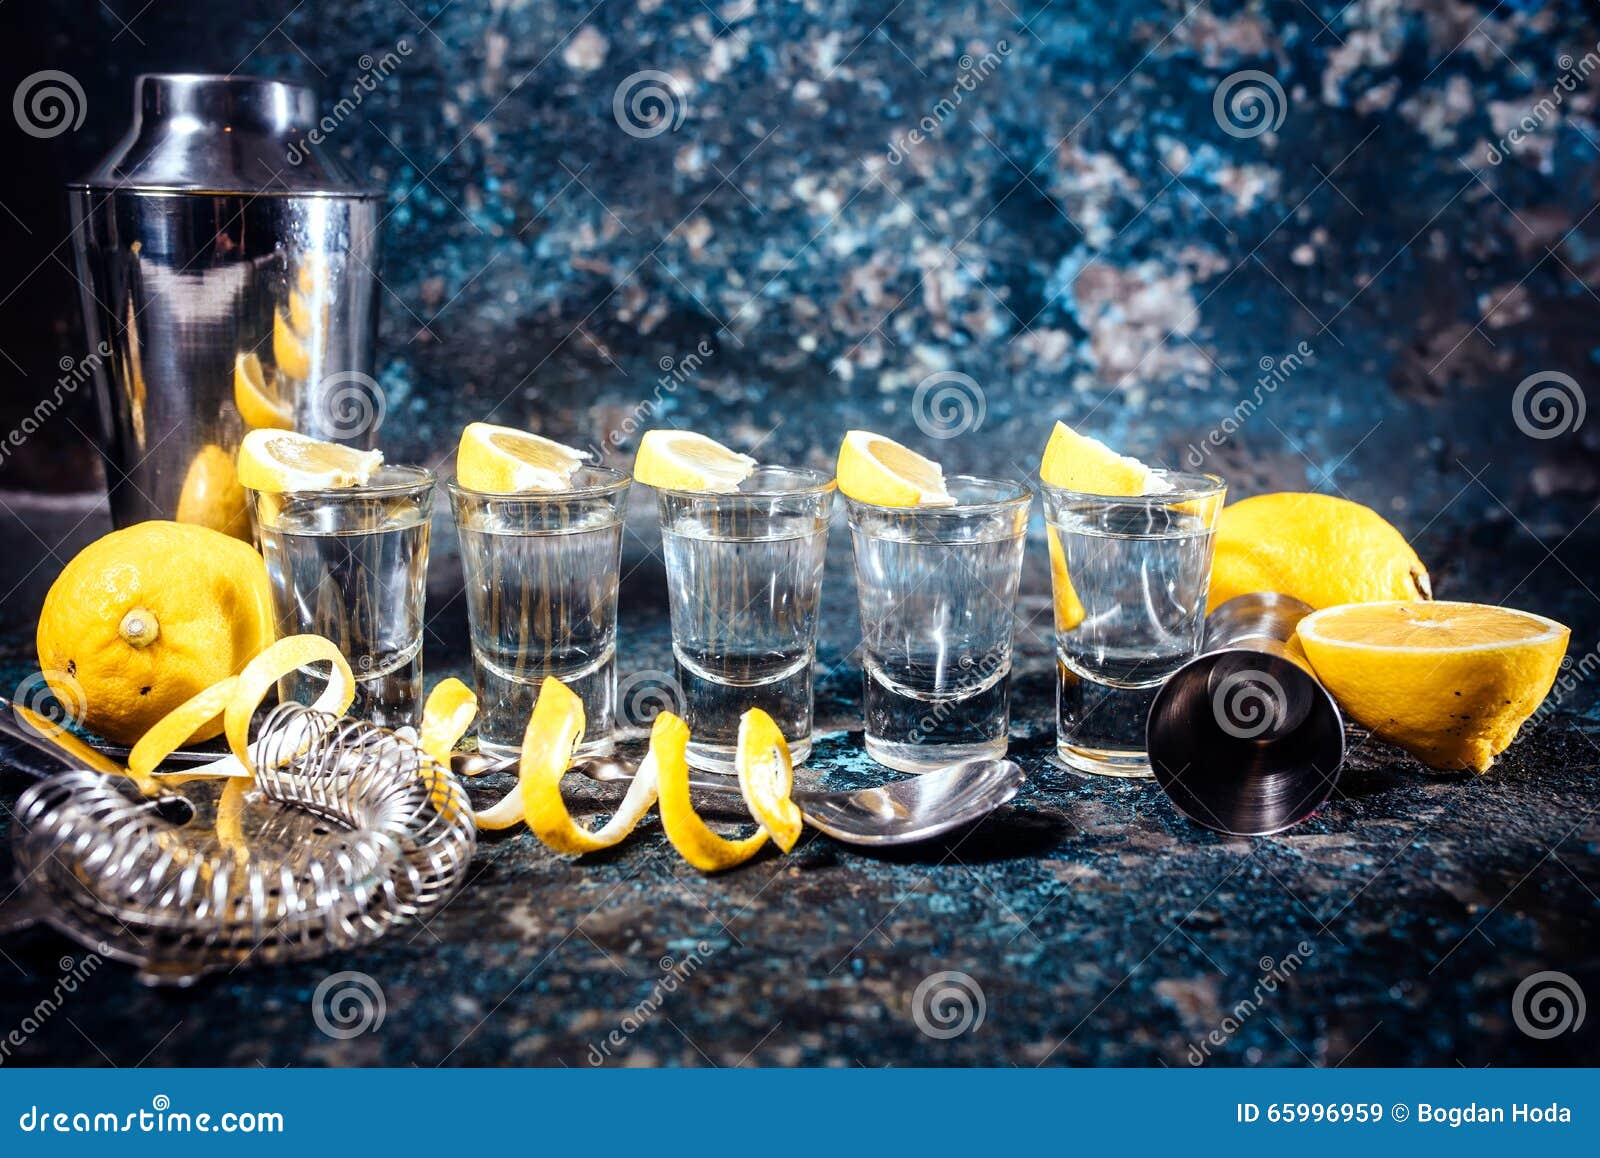 tequila shots with lemon slices and cocktail s. alcoholic drinks in shot glasses served in pub or bar